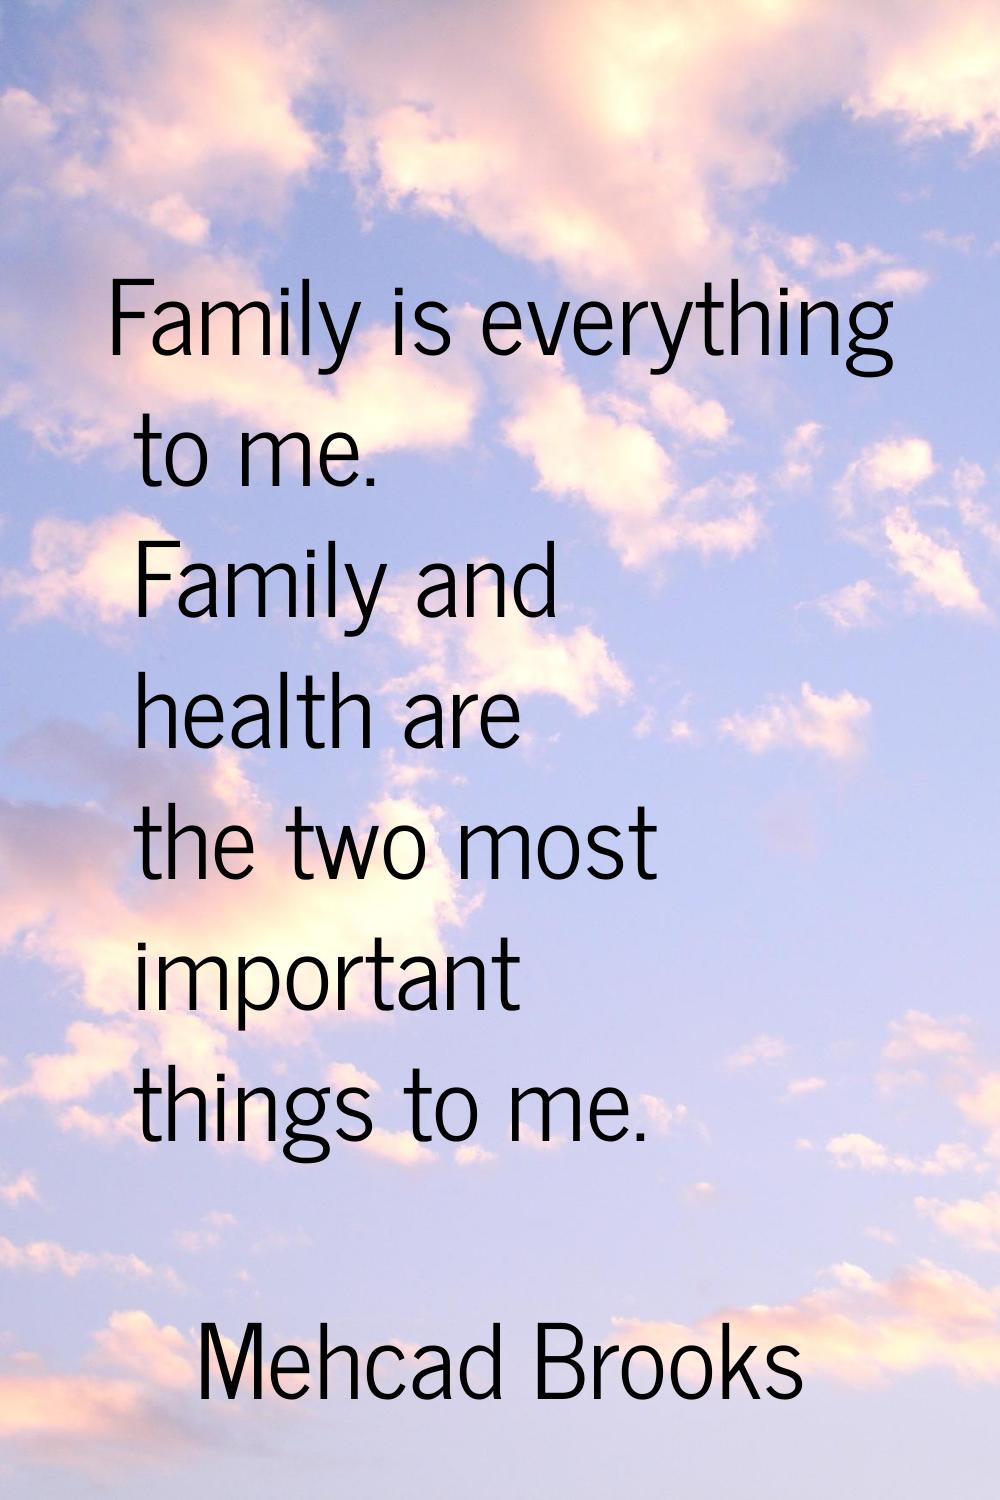 Family is everything to me. Family and health are the two most important things to me.